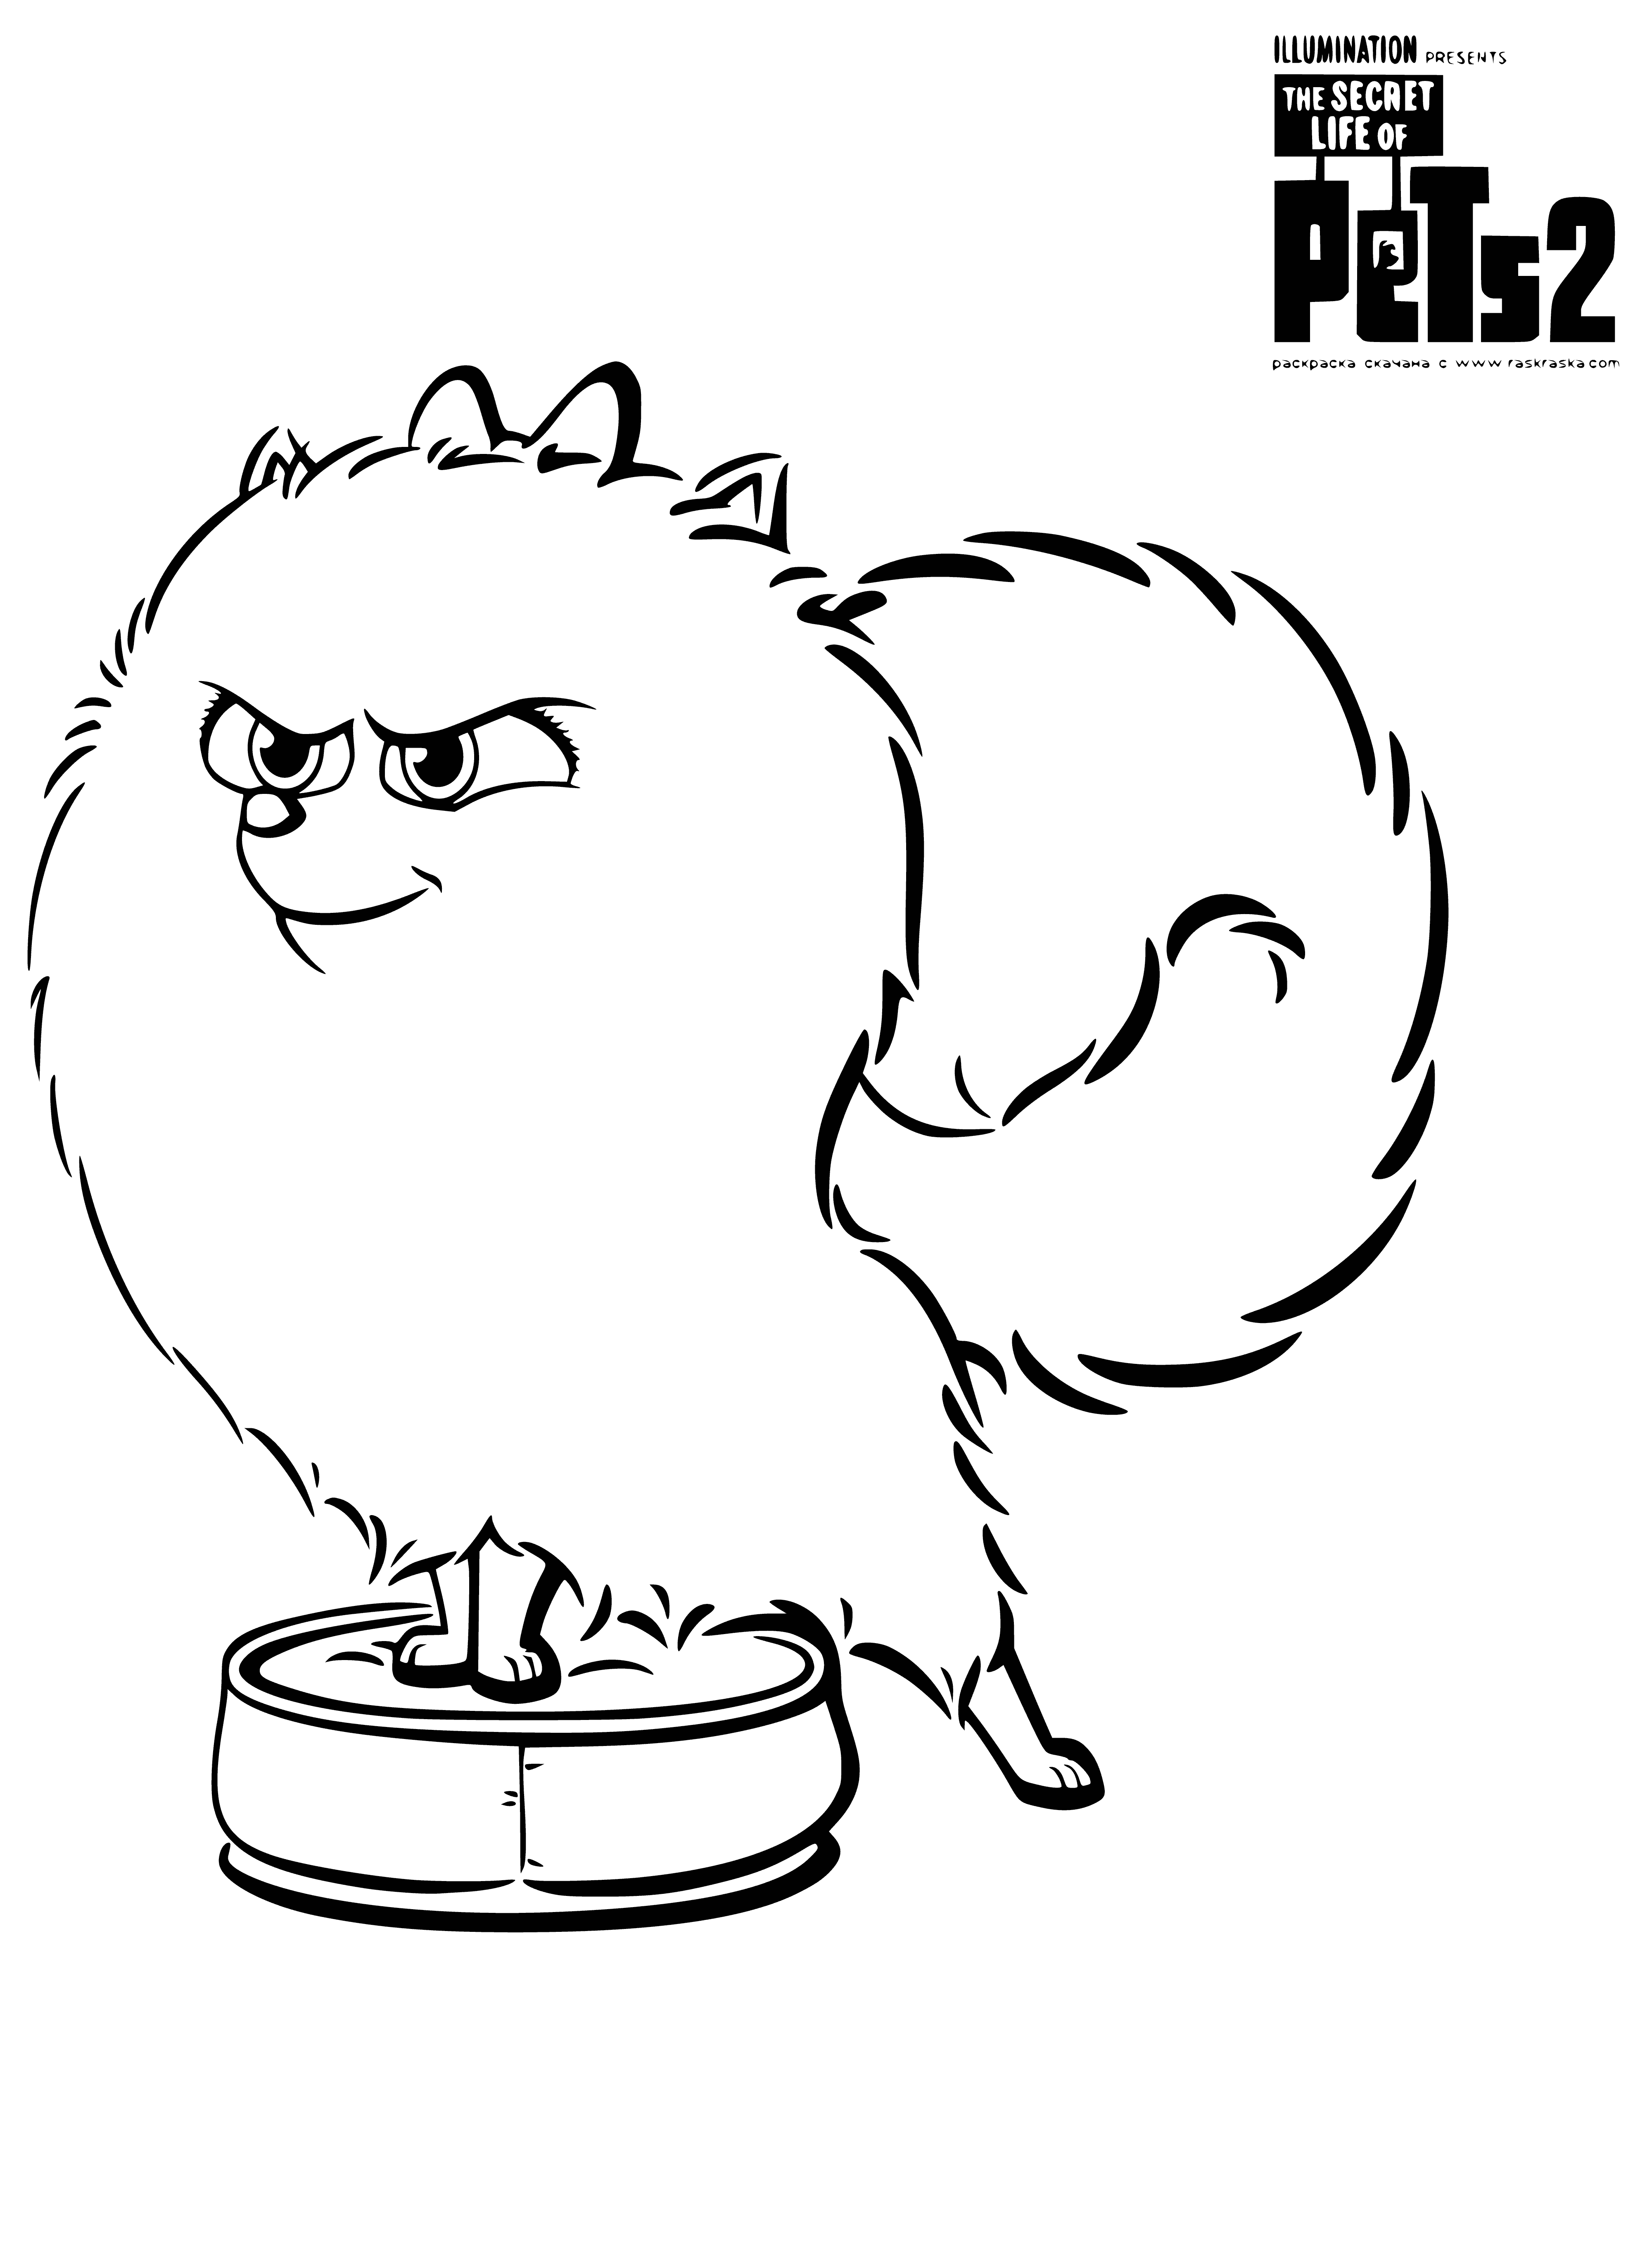 coloring page: Gidget, a white Spitz, sits on a beige couch, head cocked, tongue out, wearing a pink collar and gold heart tag.